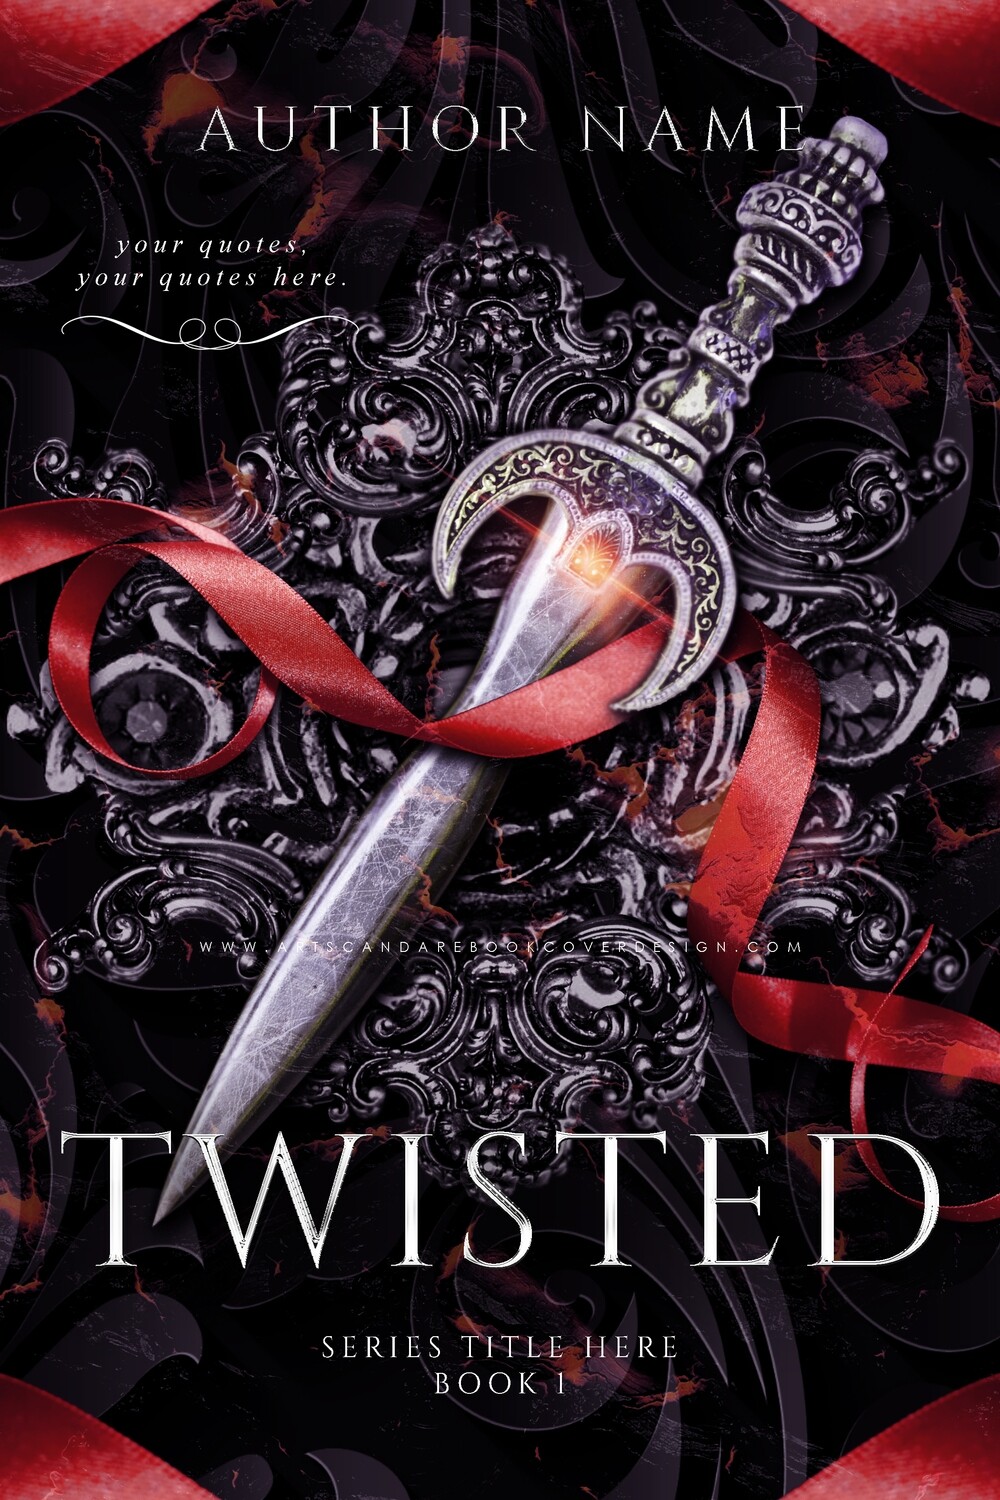 Ebook: TWISTED WICKED DUOLOGY